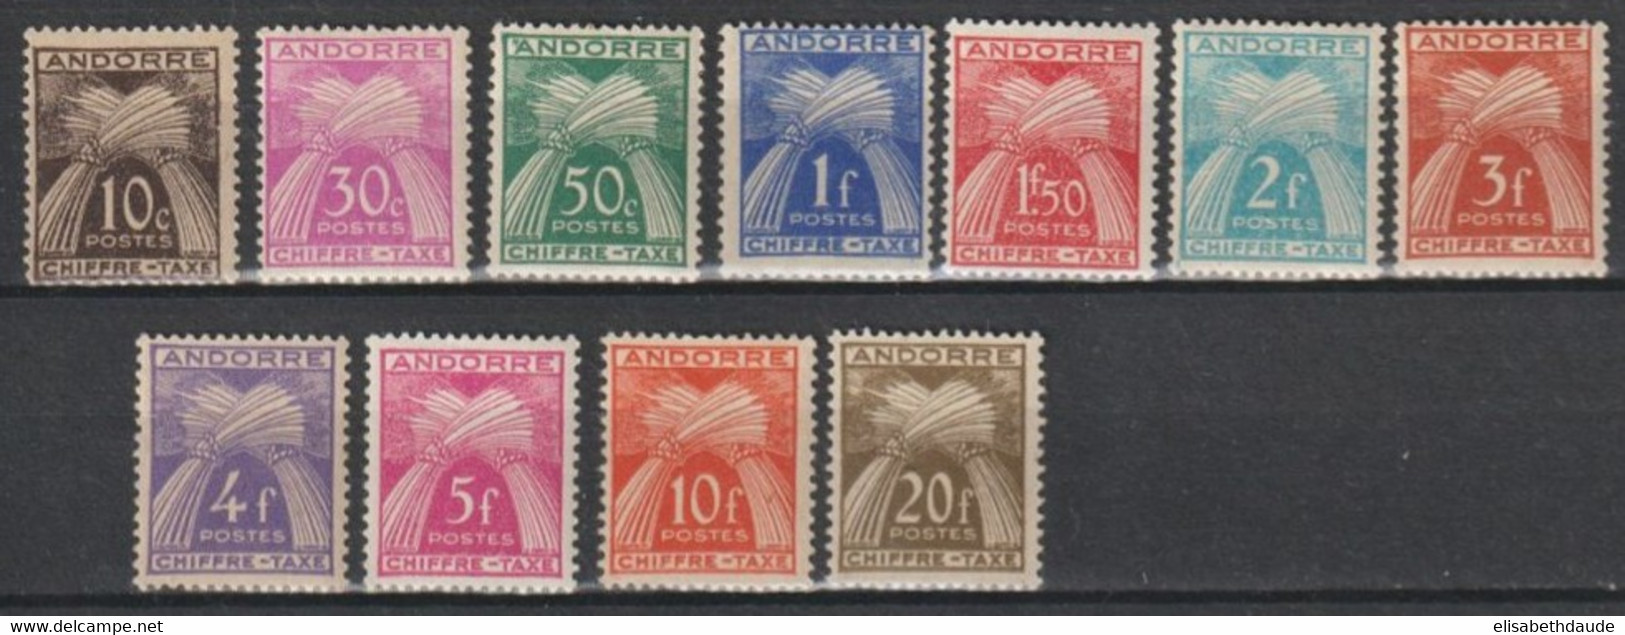 ANDORRE - TAXE - 1943 - SERIE COMPLETE GERBES - YVERT N°21/31 * MLH - COTE 2017 = 25 EUR. - - Nuovi